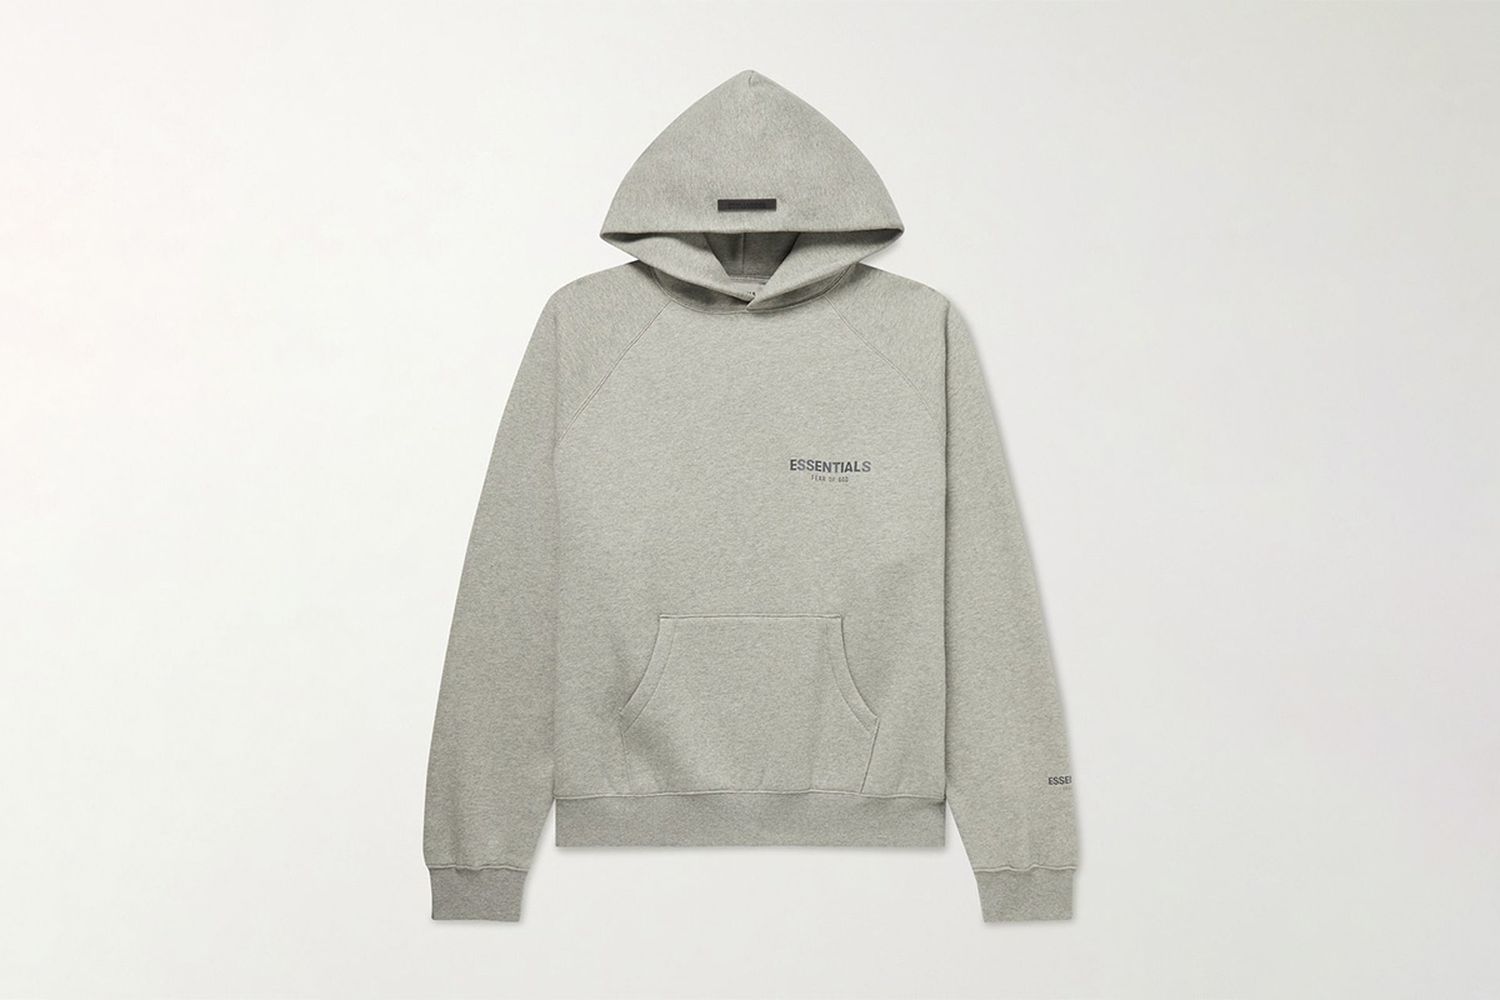 Shop the Exclusive Fear of God Collection at MR PORTER Here